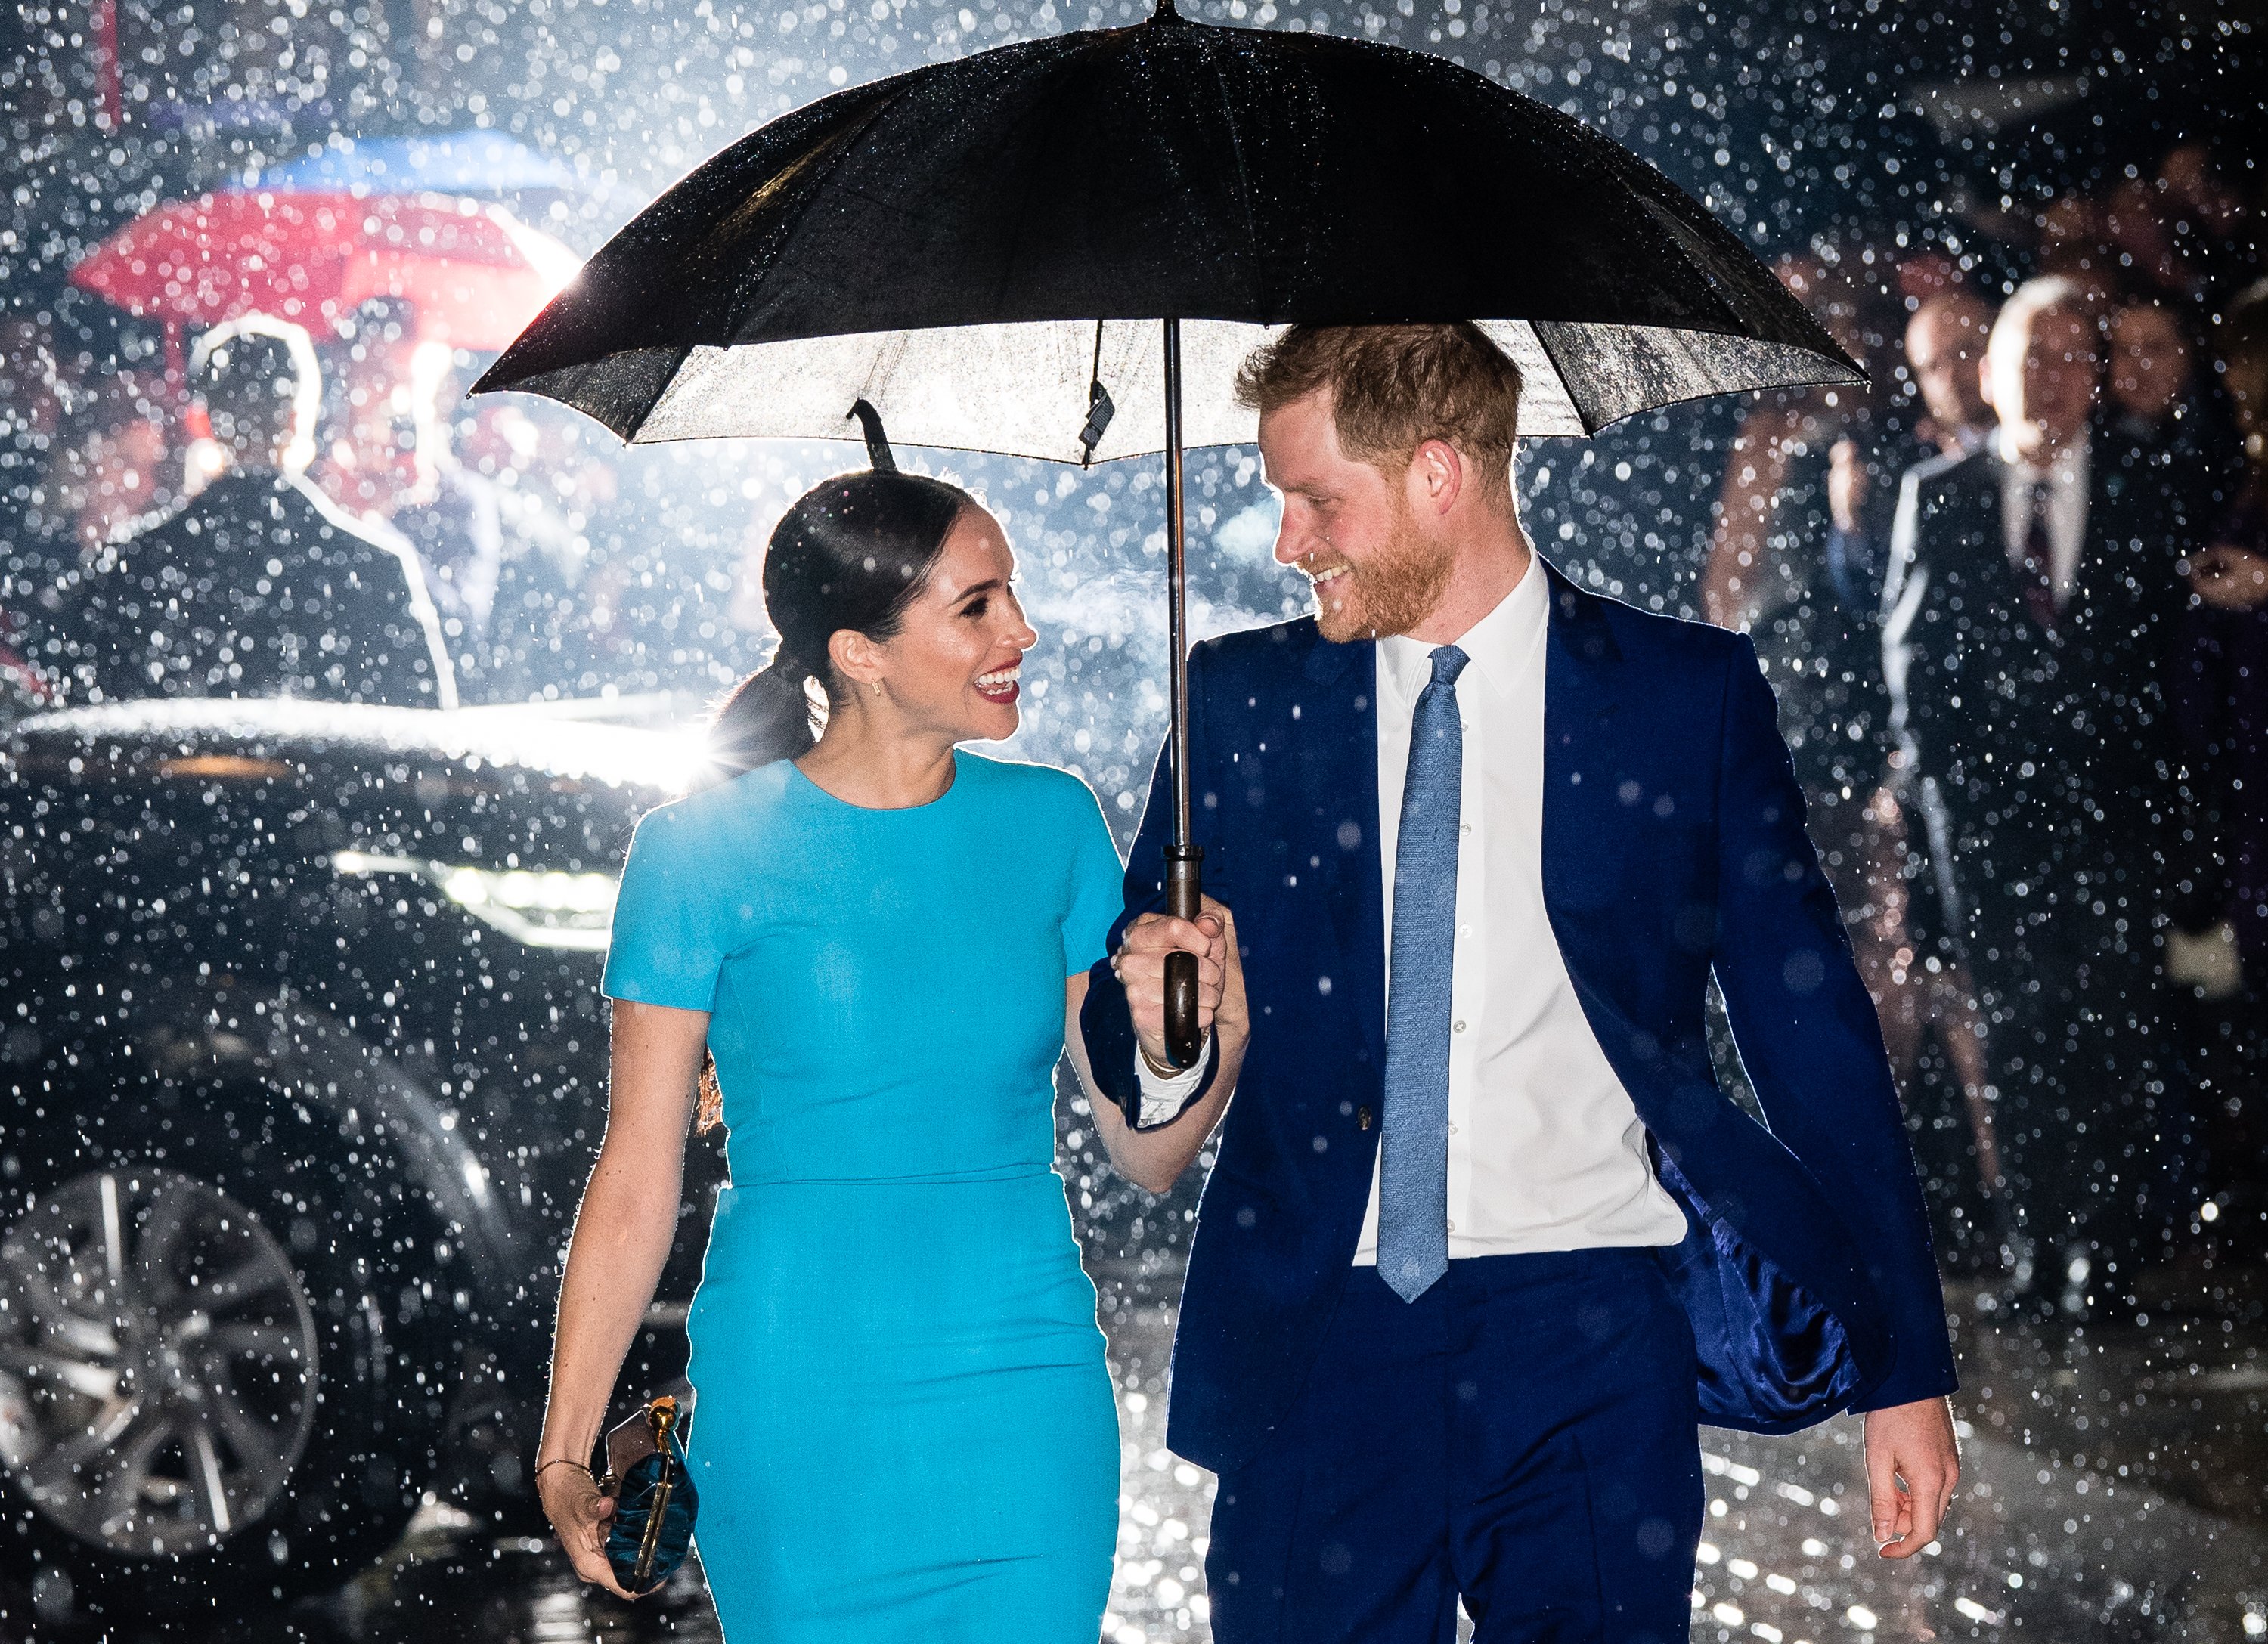 Prince Harry and Meghan Markle attend The Endeavour Fund Awards on March 05, 2020, in London, England. | Photo: Getty Images.